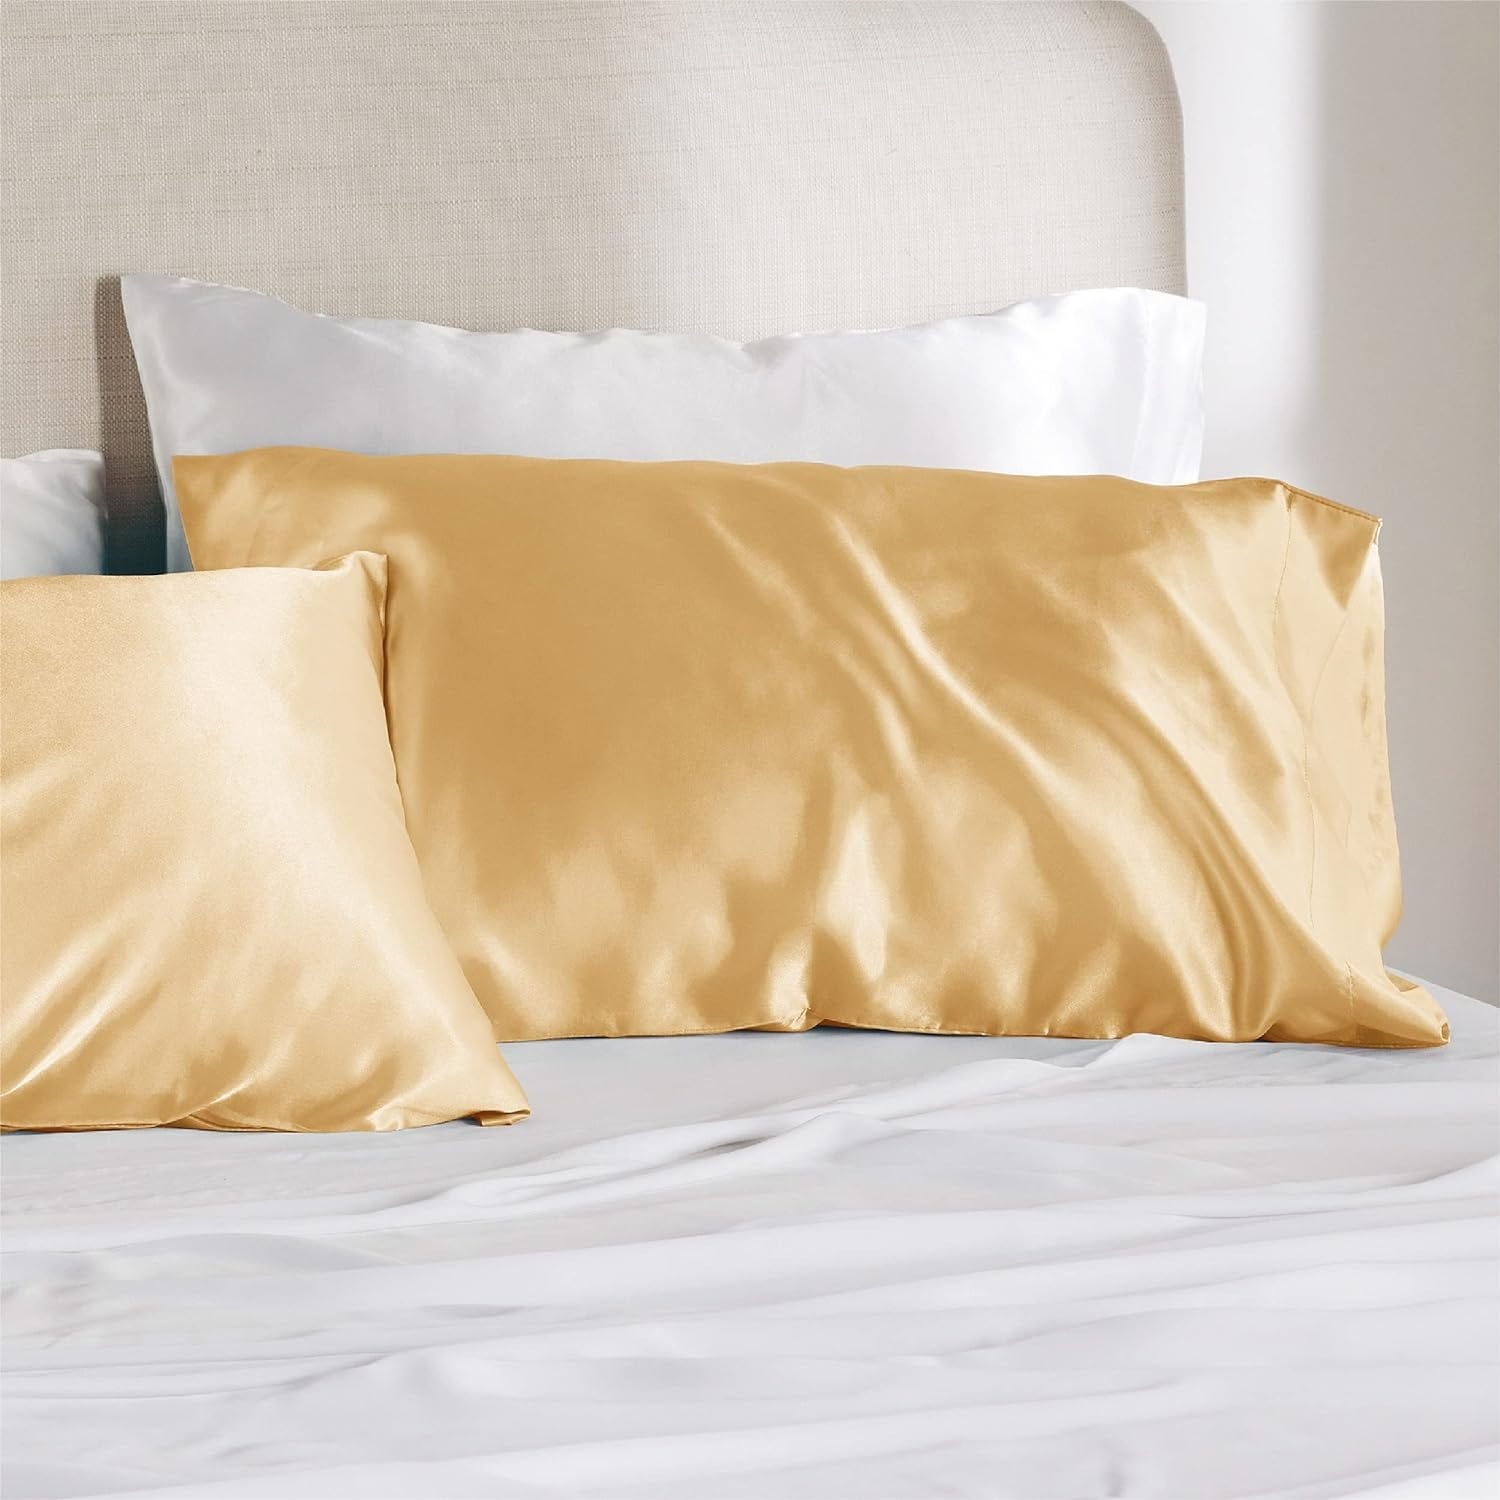 These Best-Selling Satin Pillowcases Are on Sale for Just $6 on Amazon